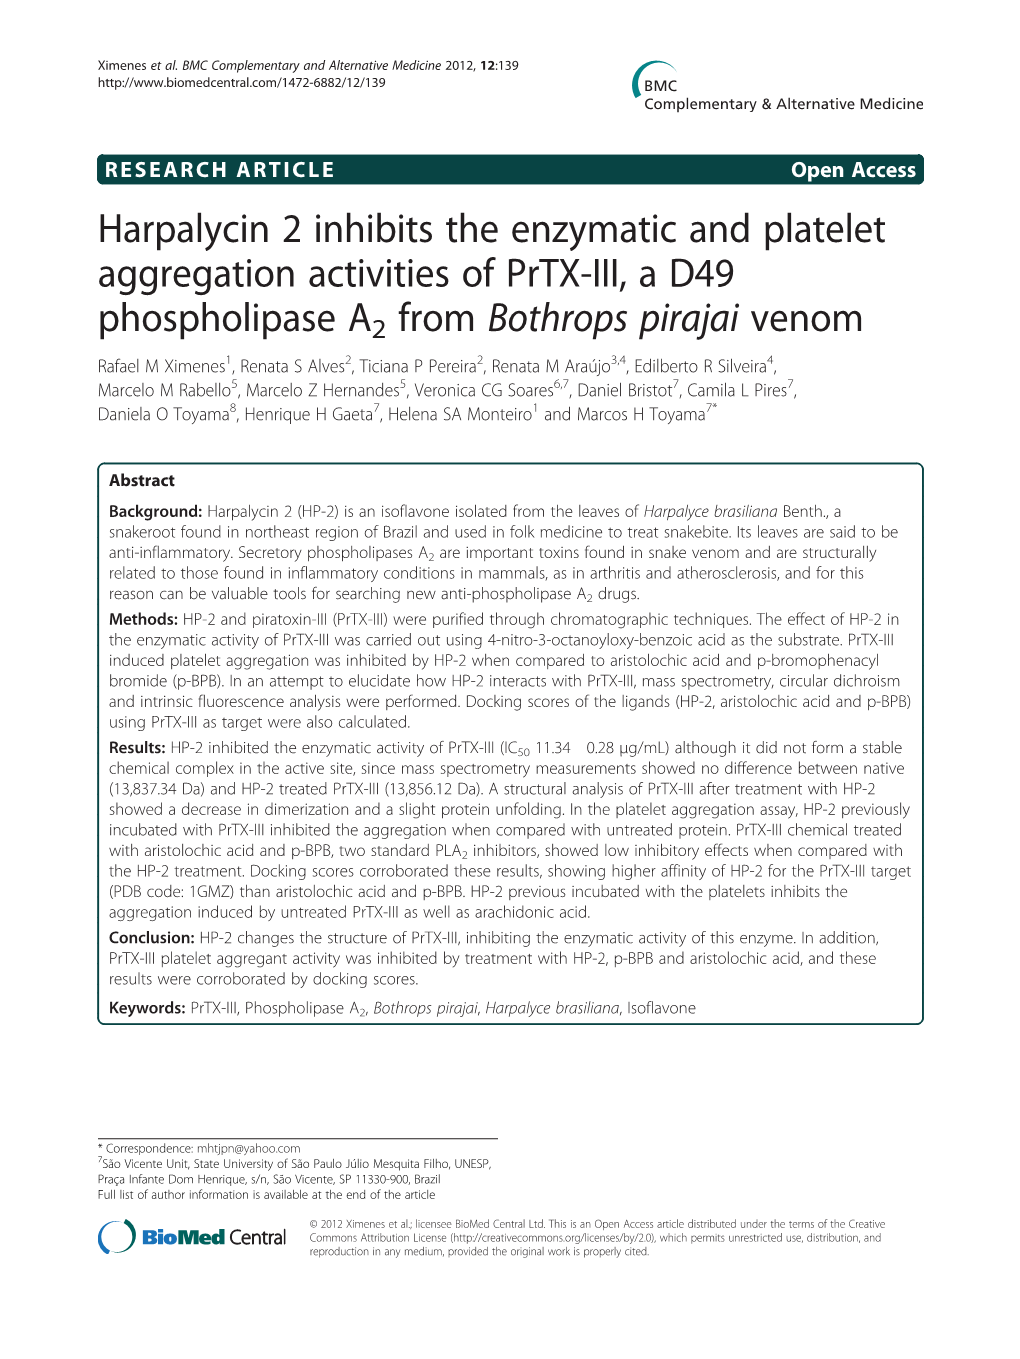 Harpalycin 2 Inhibits the Enzymatic and Platelet Aggregation Activities